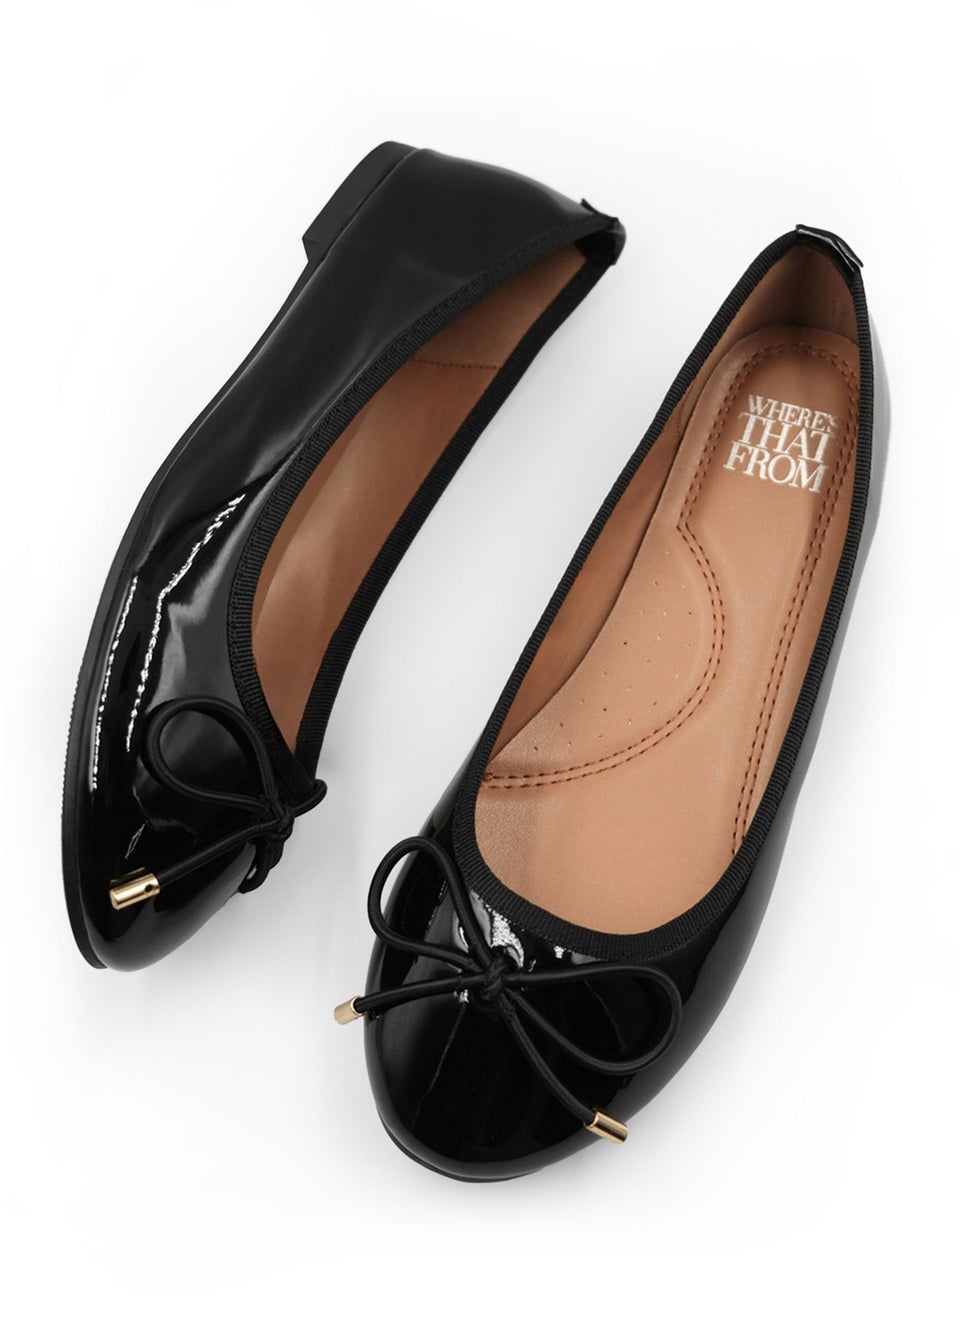 Where's That From Black Patent Bexley Slip On Flat Pumps